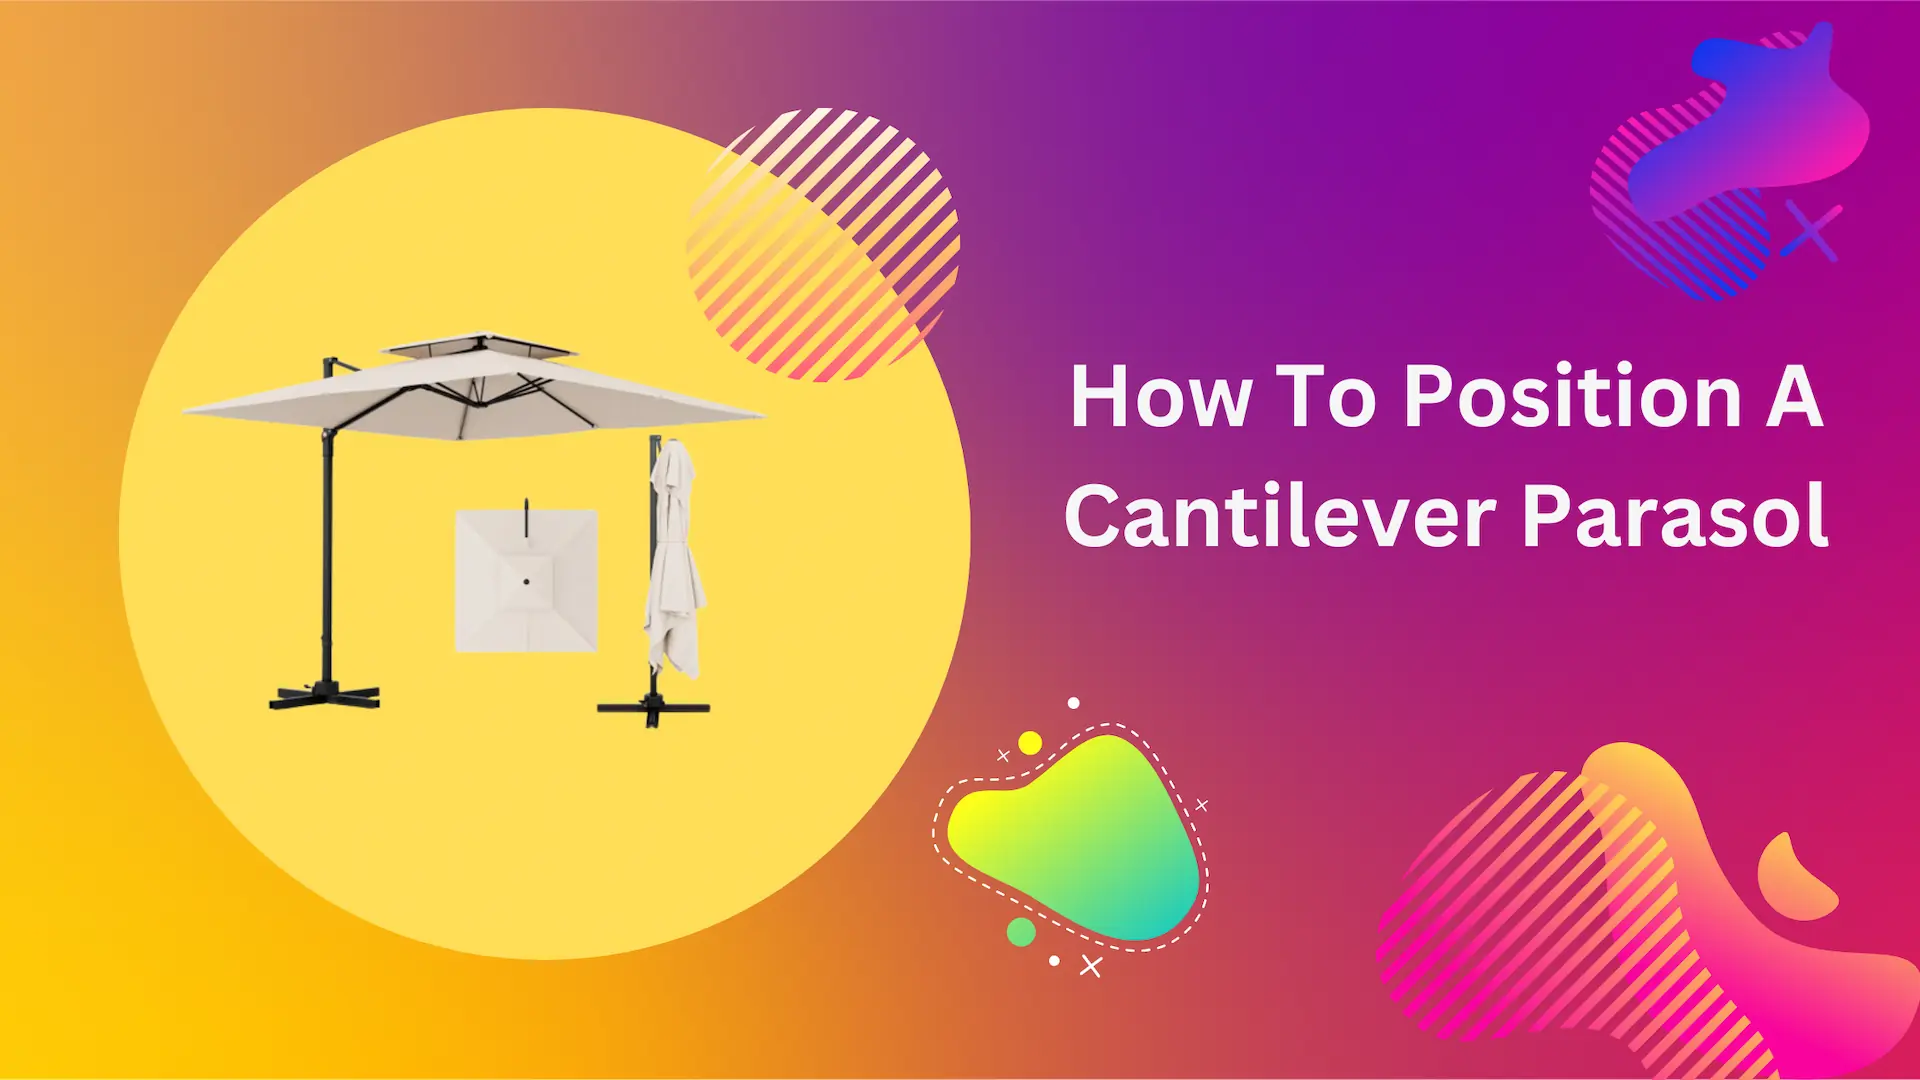 How To Position A Cantilever Parasol